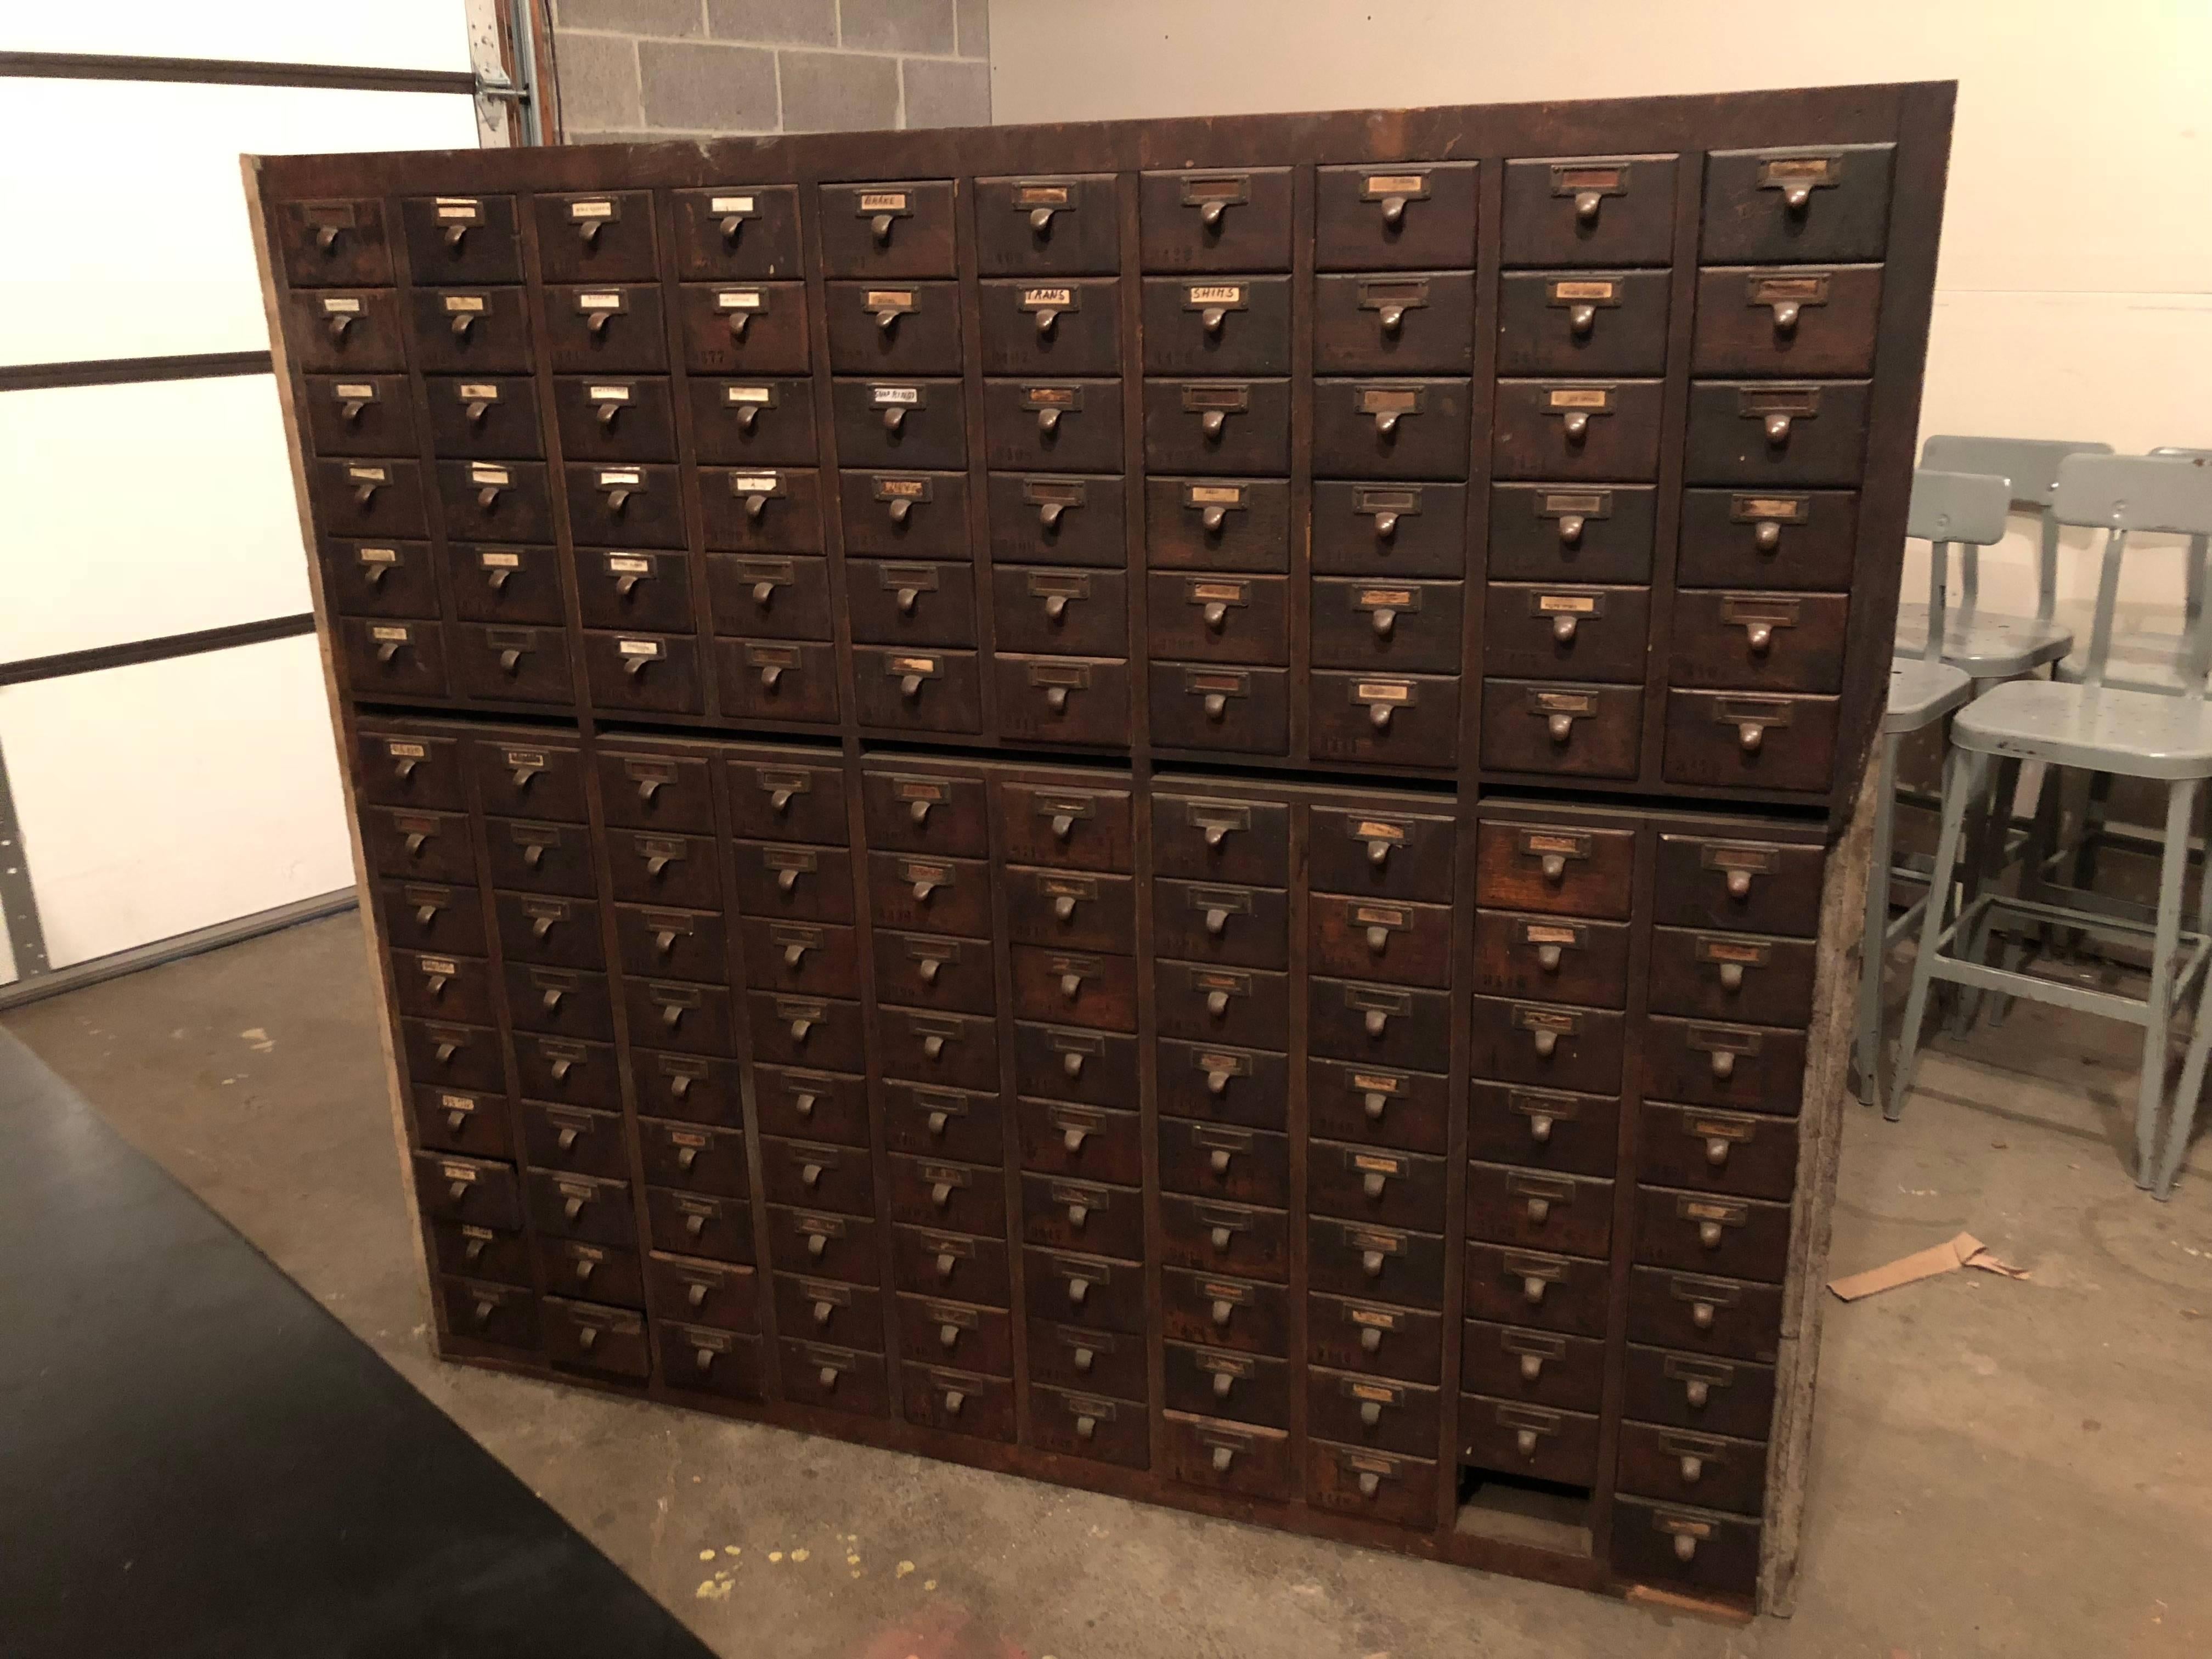 Midcentury file cabinet of oak, formerly used in library. Houses 150 sliding drawers with brass pulls. Ideal storage unit. Consists of two pieces, one stacked atop the other. Could be situated in two different locations to expand functionality.